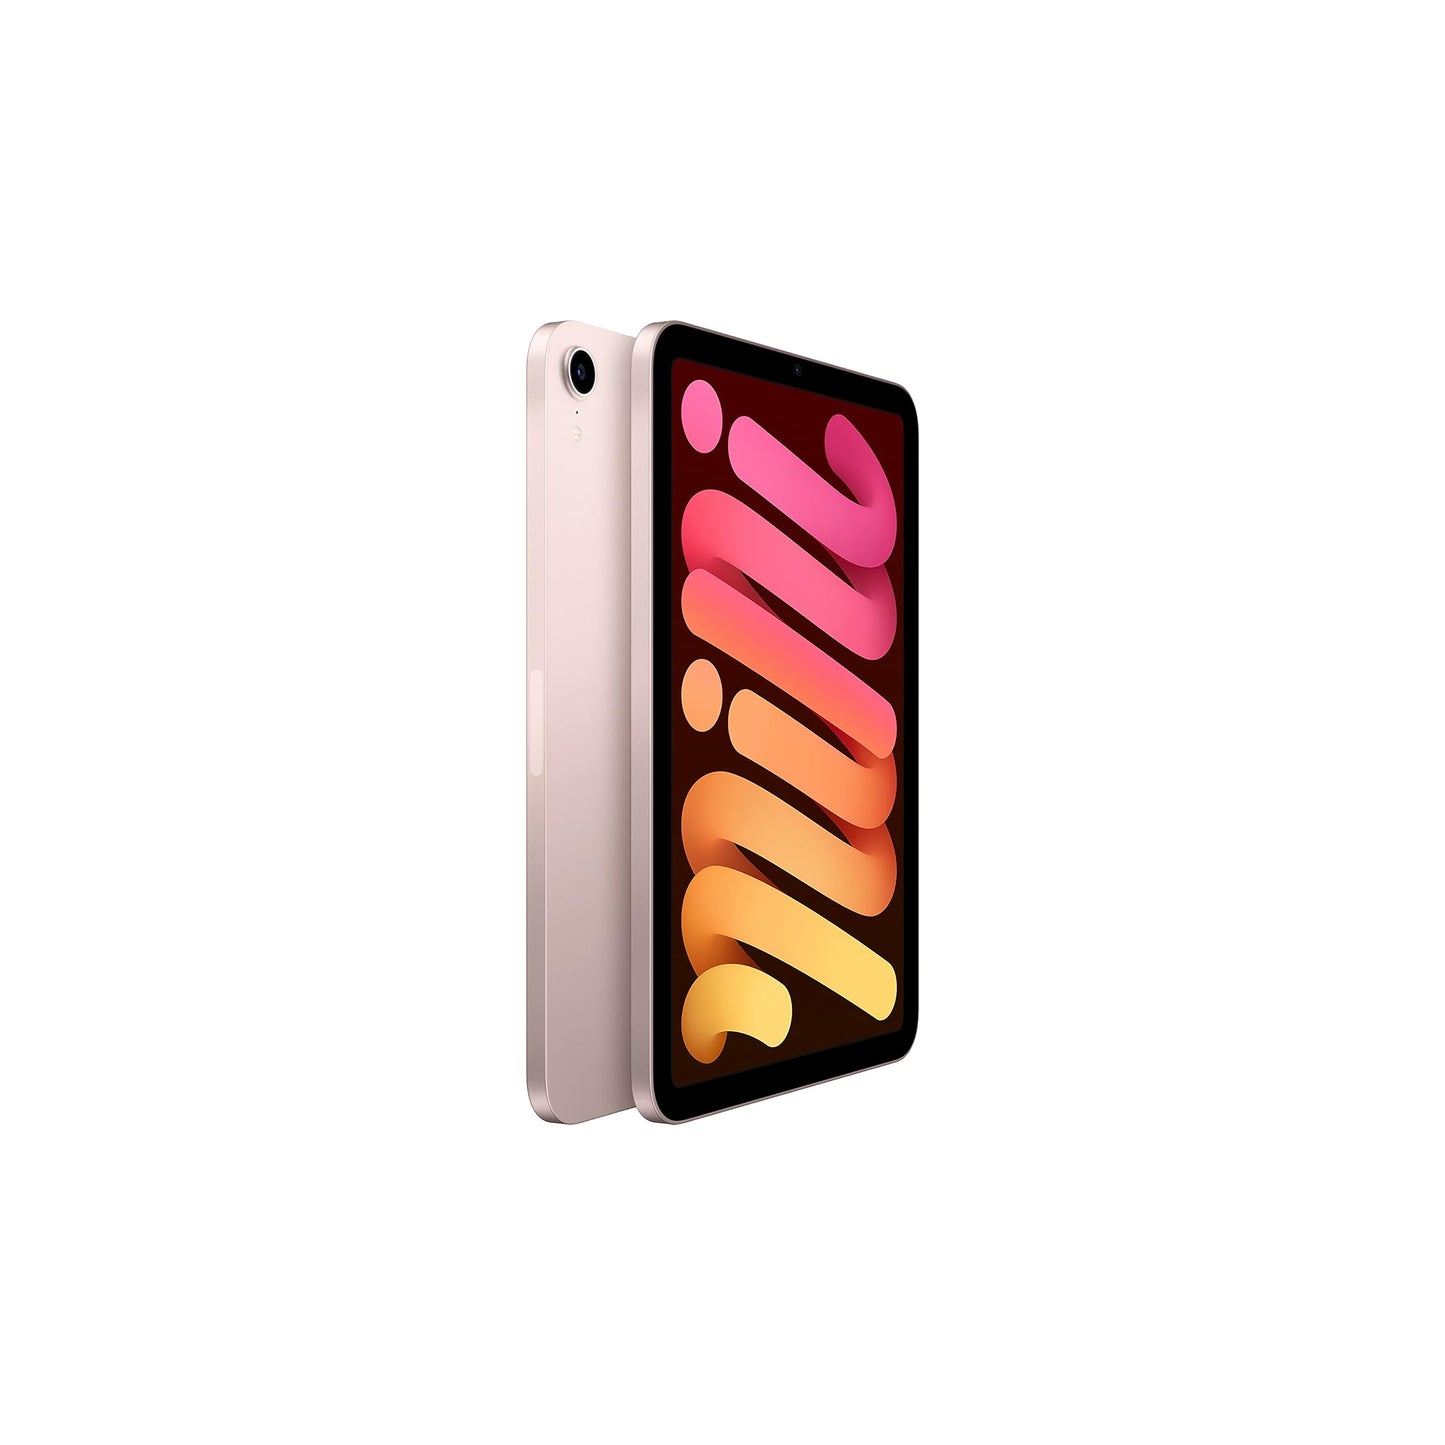 Apple iPad Mini (6th Generation): with A15 Bionic chip, 8.3-inch Liquid Retina Display, 256GB, Wi-Fi 6, 12MP front/12MP Back Camera, Touch ID, All-Day Battery Life – Starlight